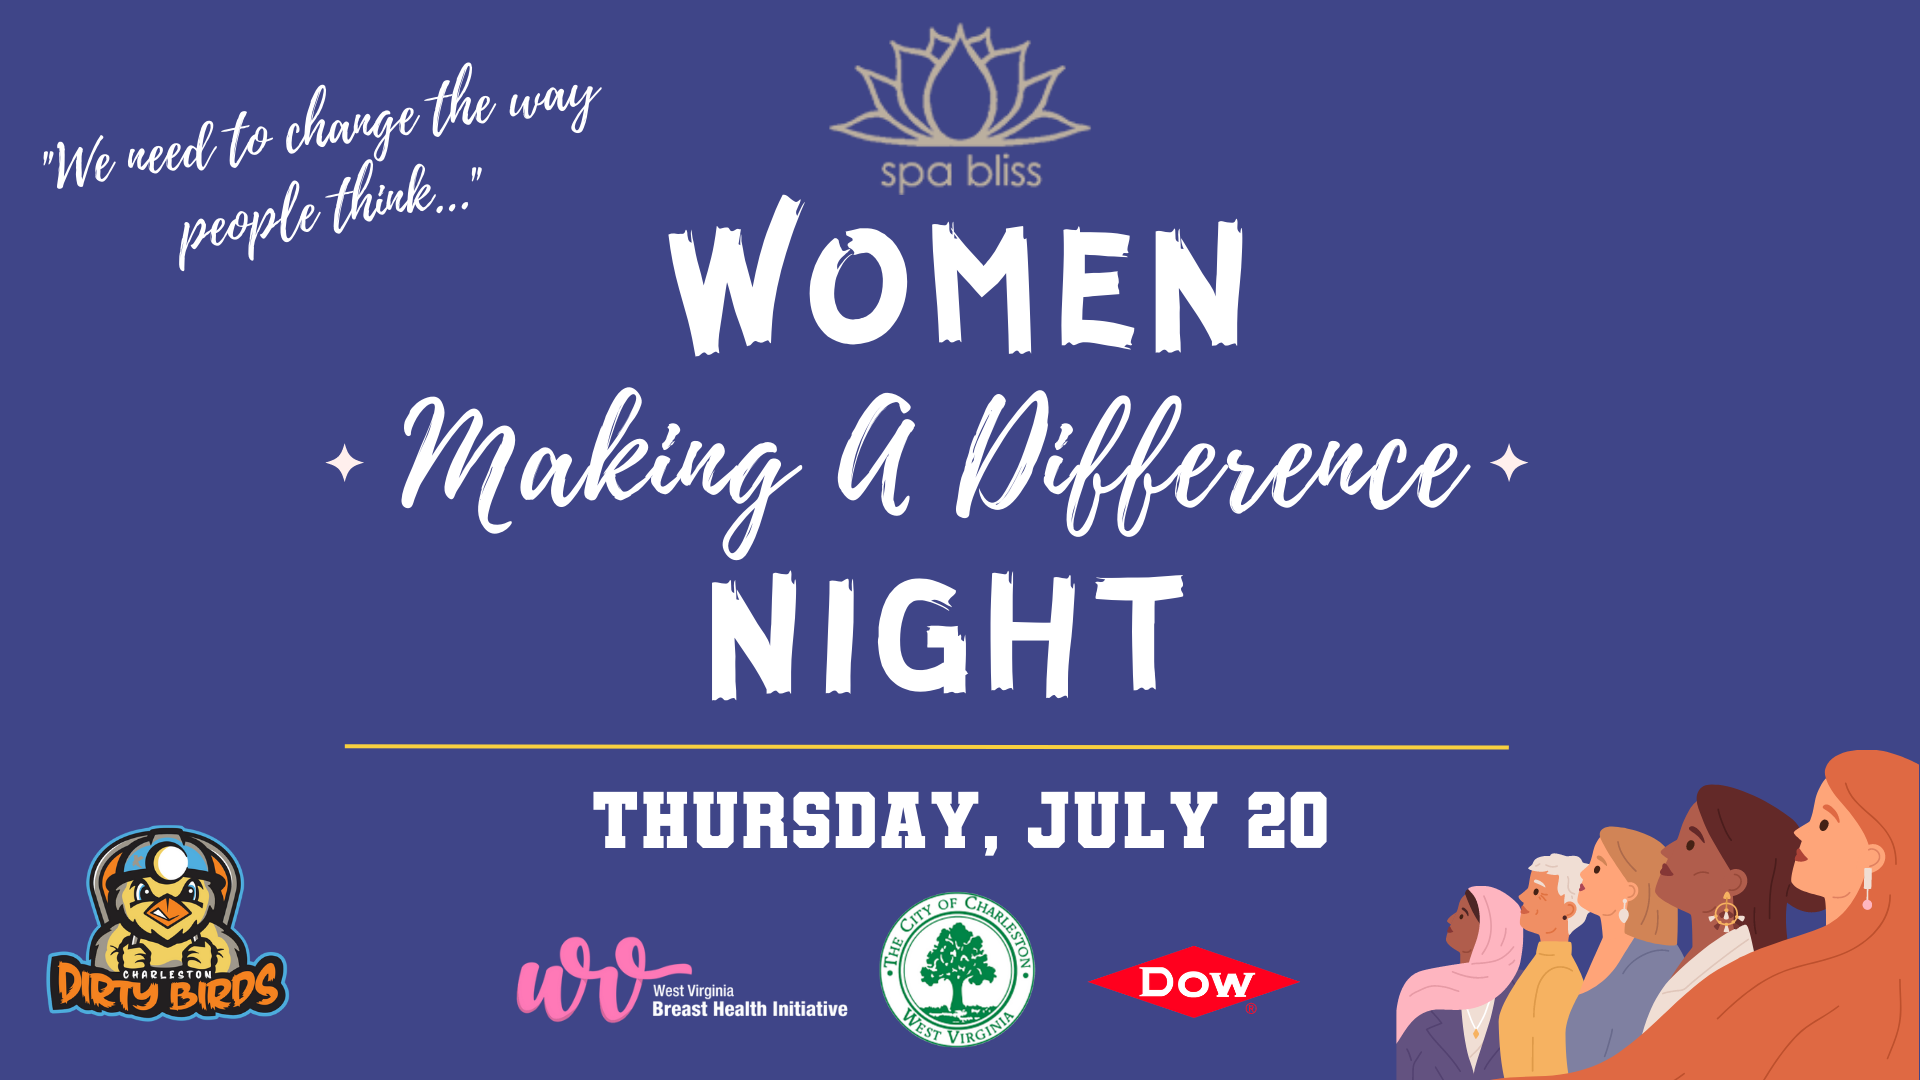 DIRTY BIRDS, SPA BLISS TO CELEBRATE WOMEN MAKING A DIFFERENCE NIGHT